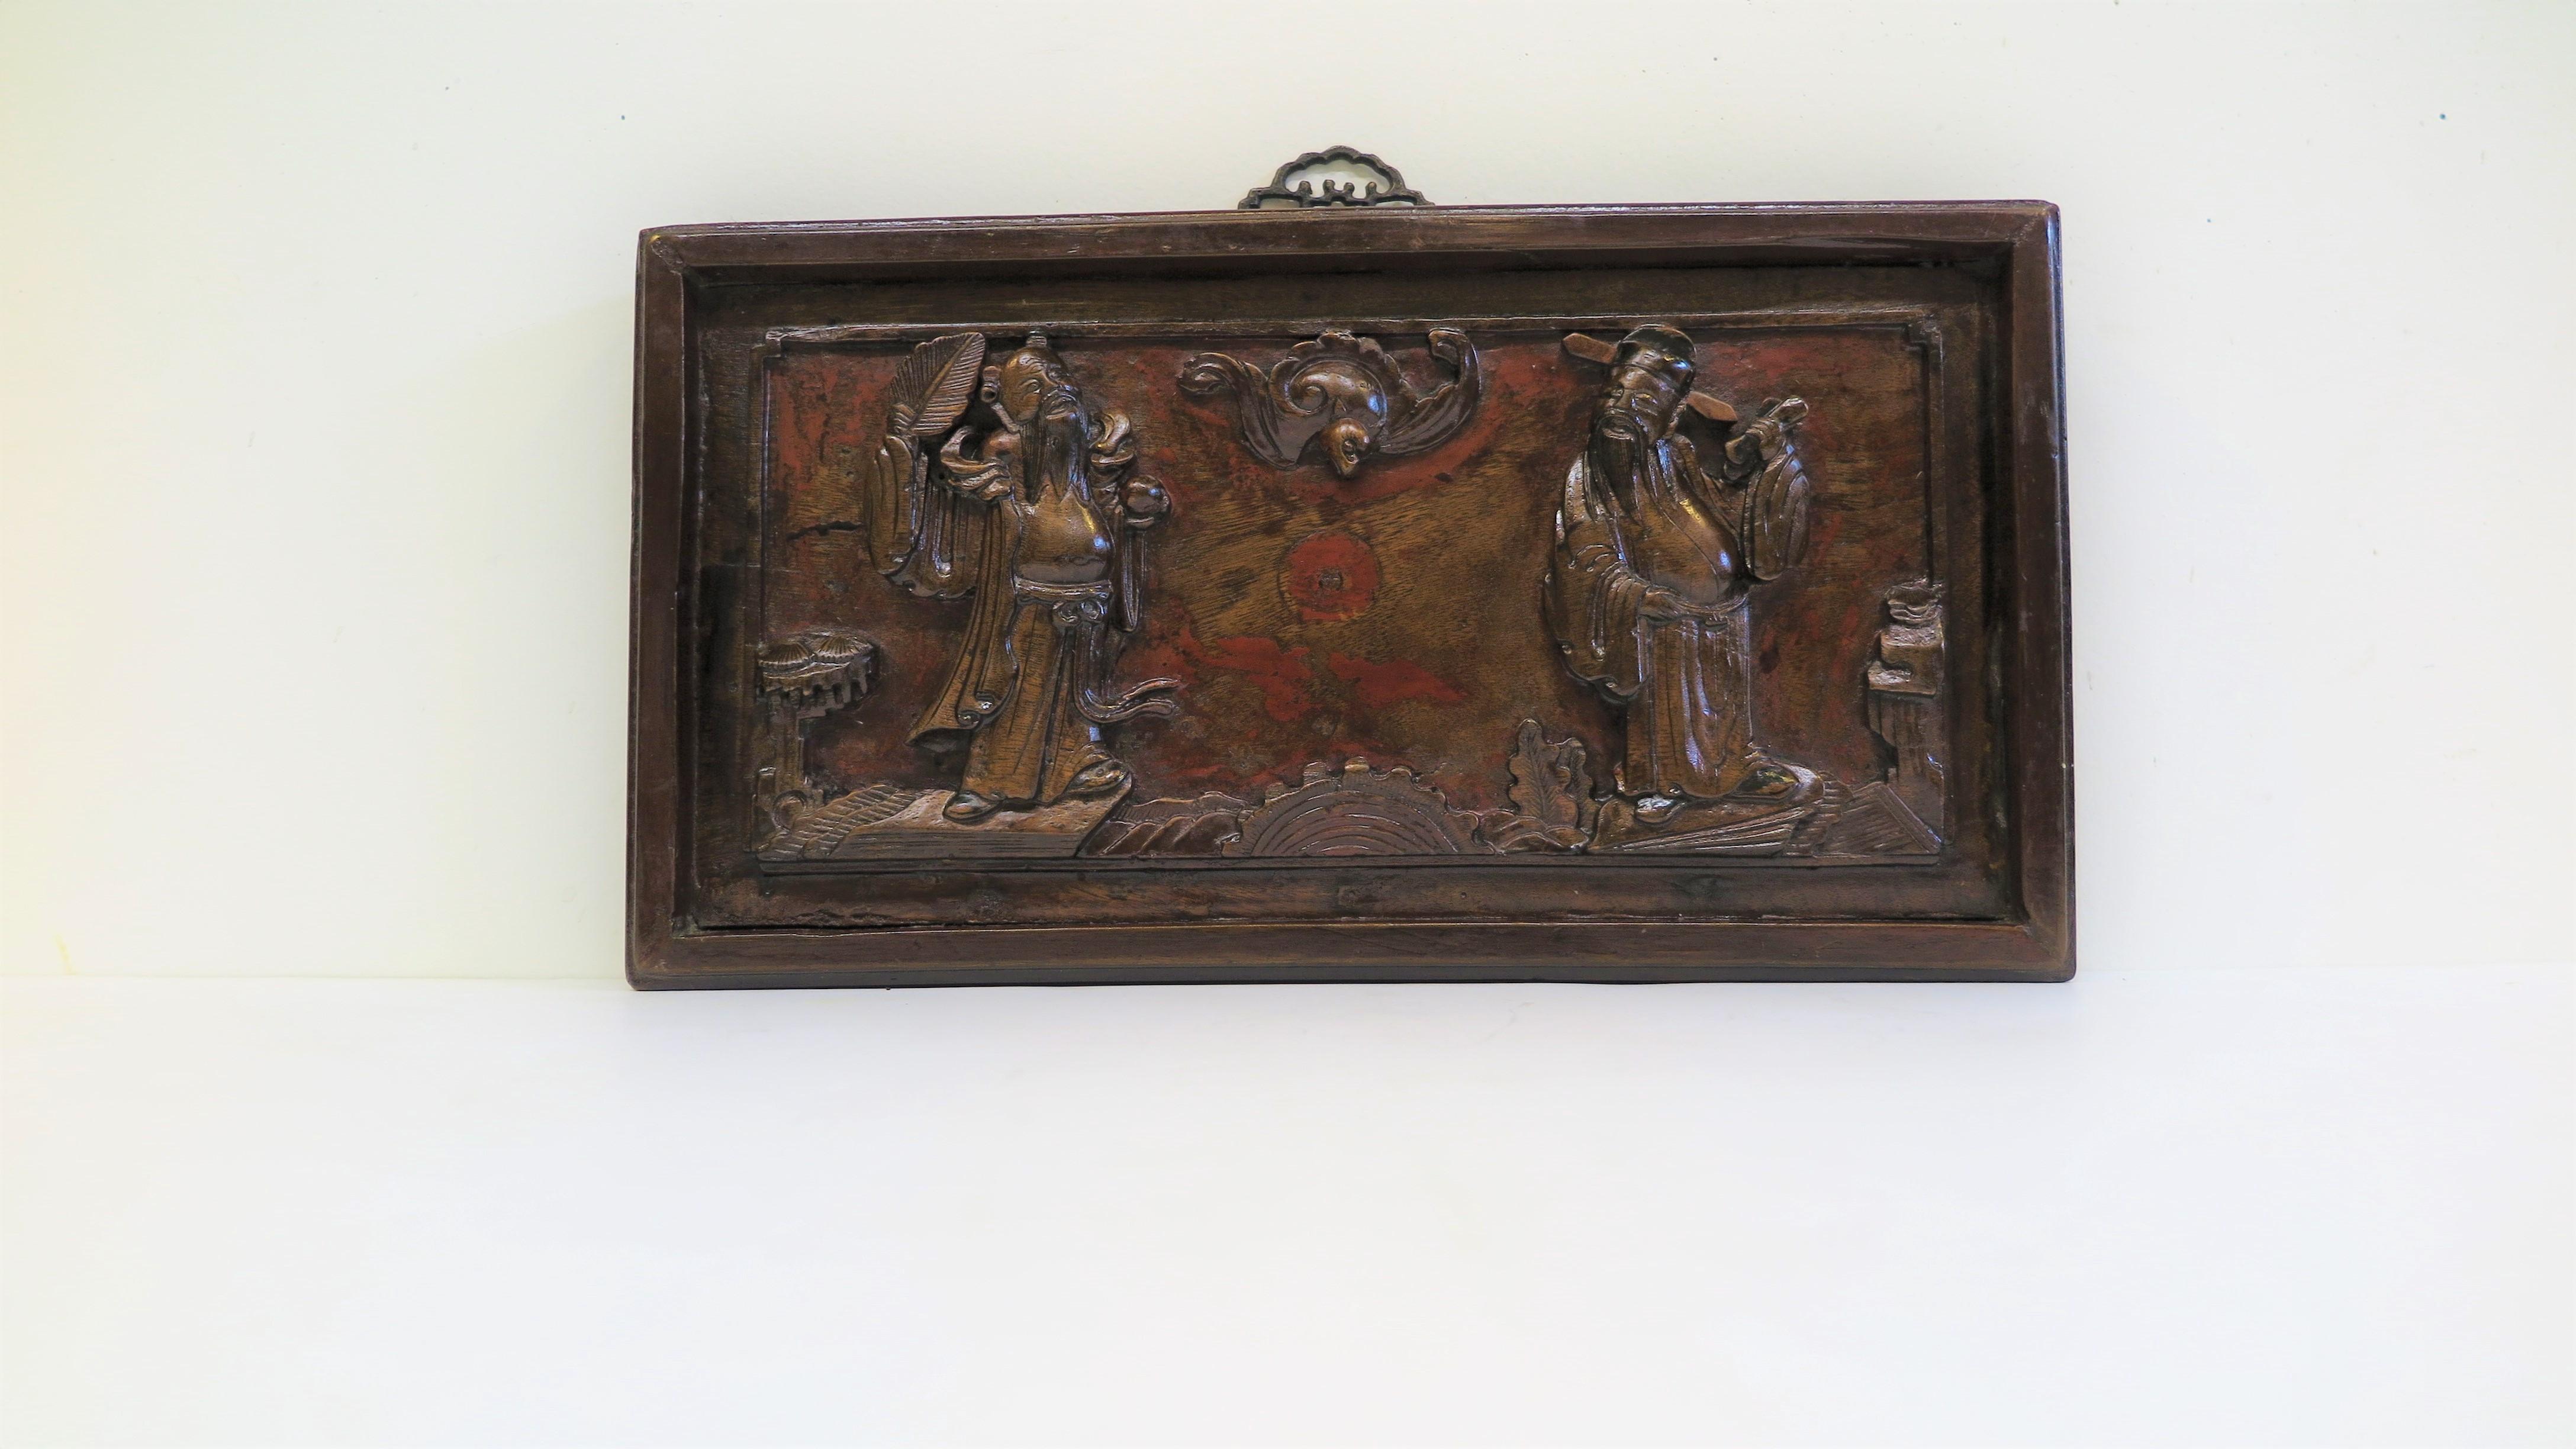 19th century auspicious carved panel story board. Chinese carved wooden panel of one solid piece of carved wood set in a wooden frame. A Chinese carved wooden panel telling an Auspicious story. To the center of the relief carving bottom are the sun